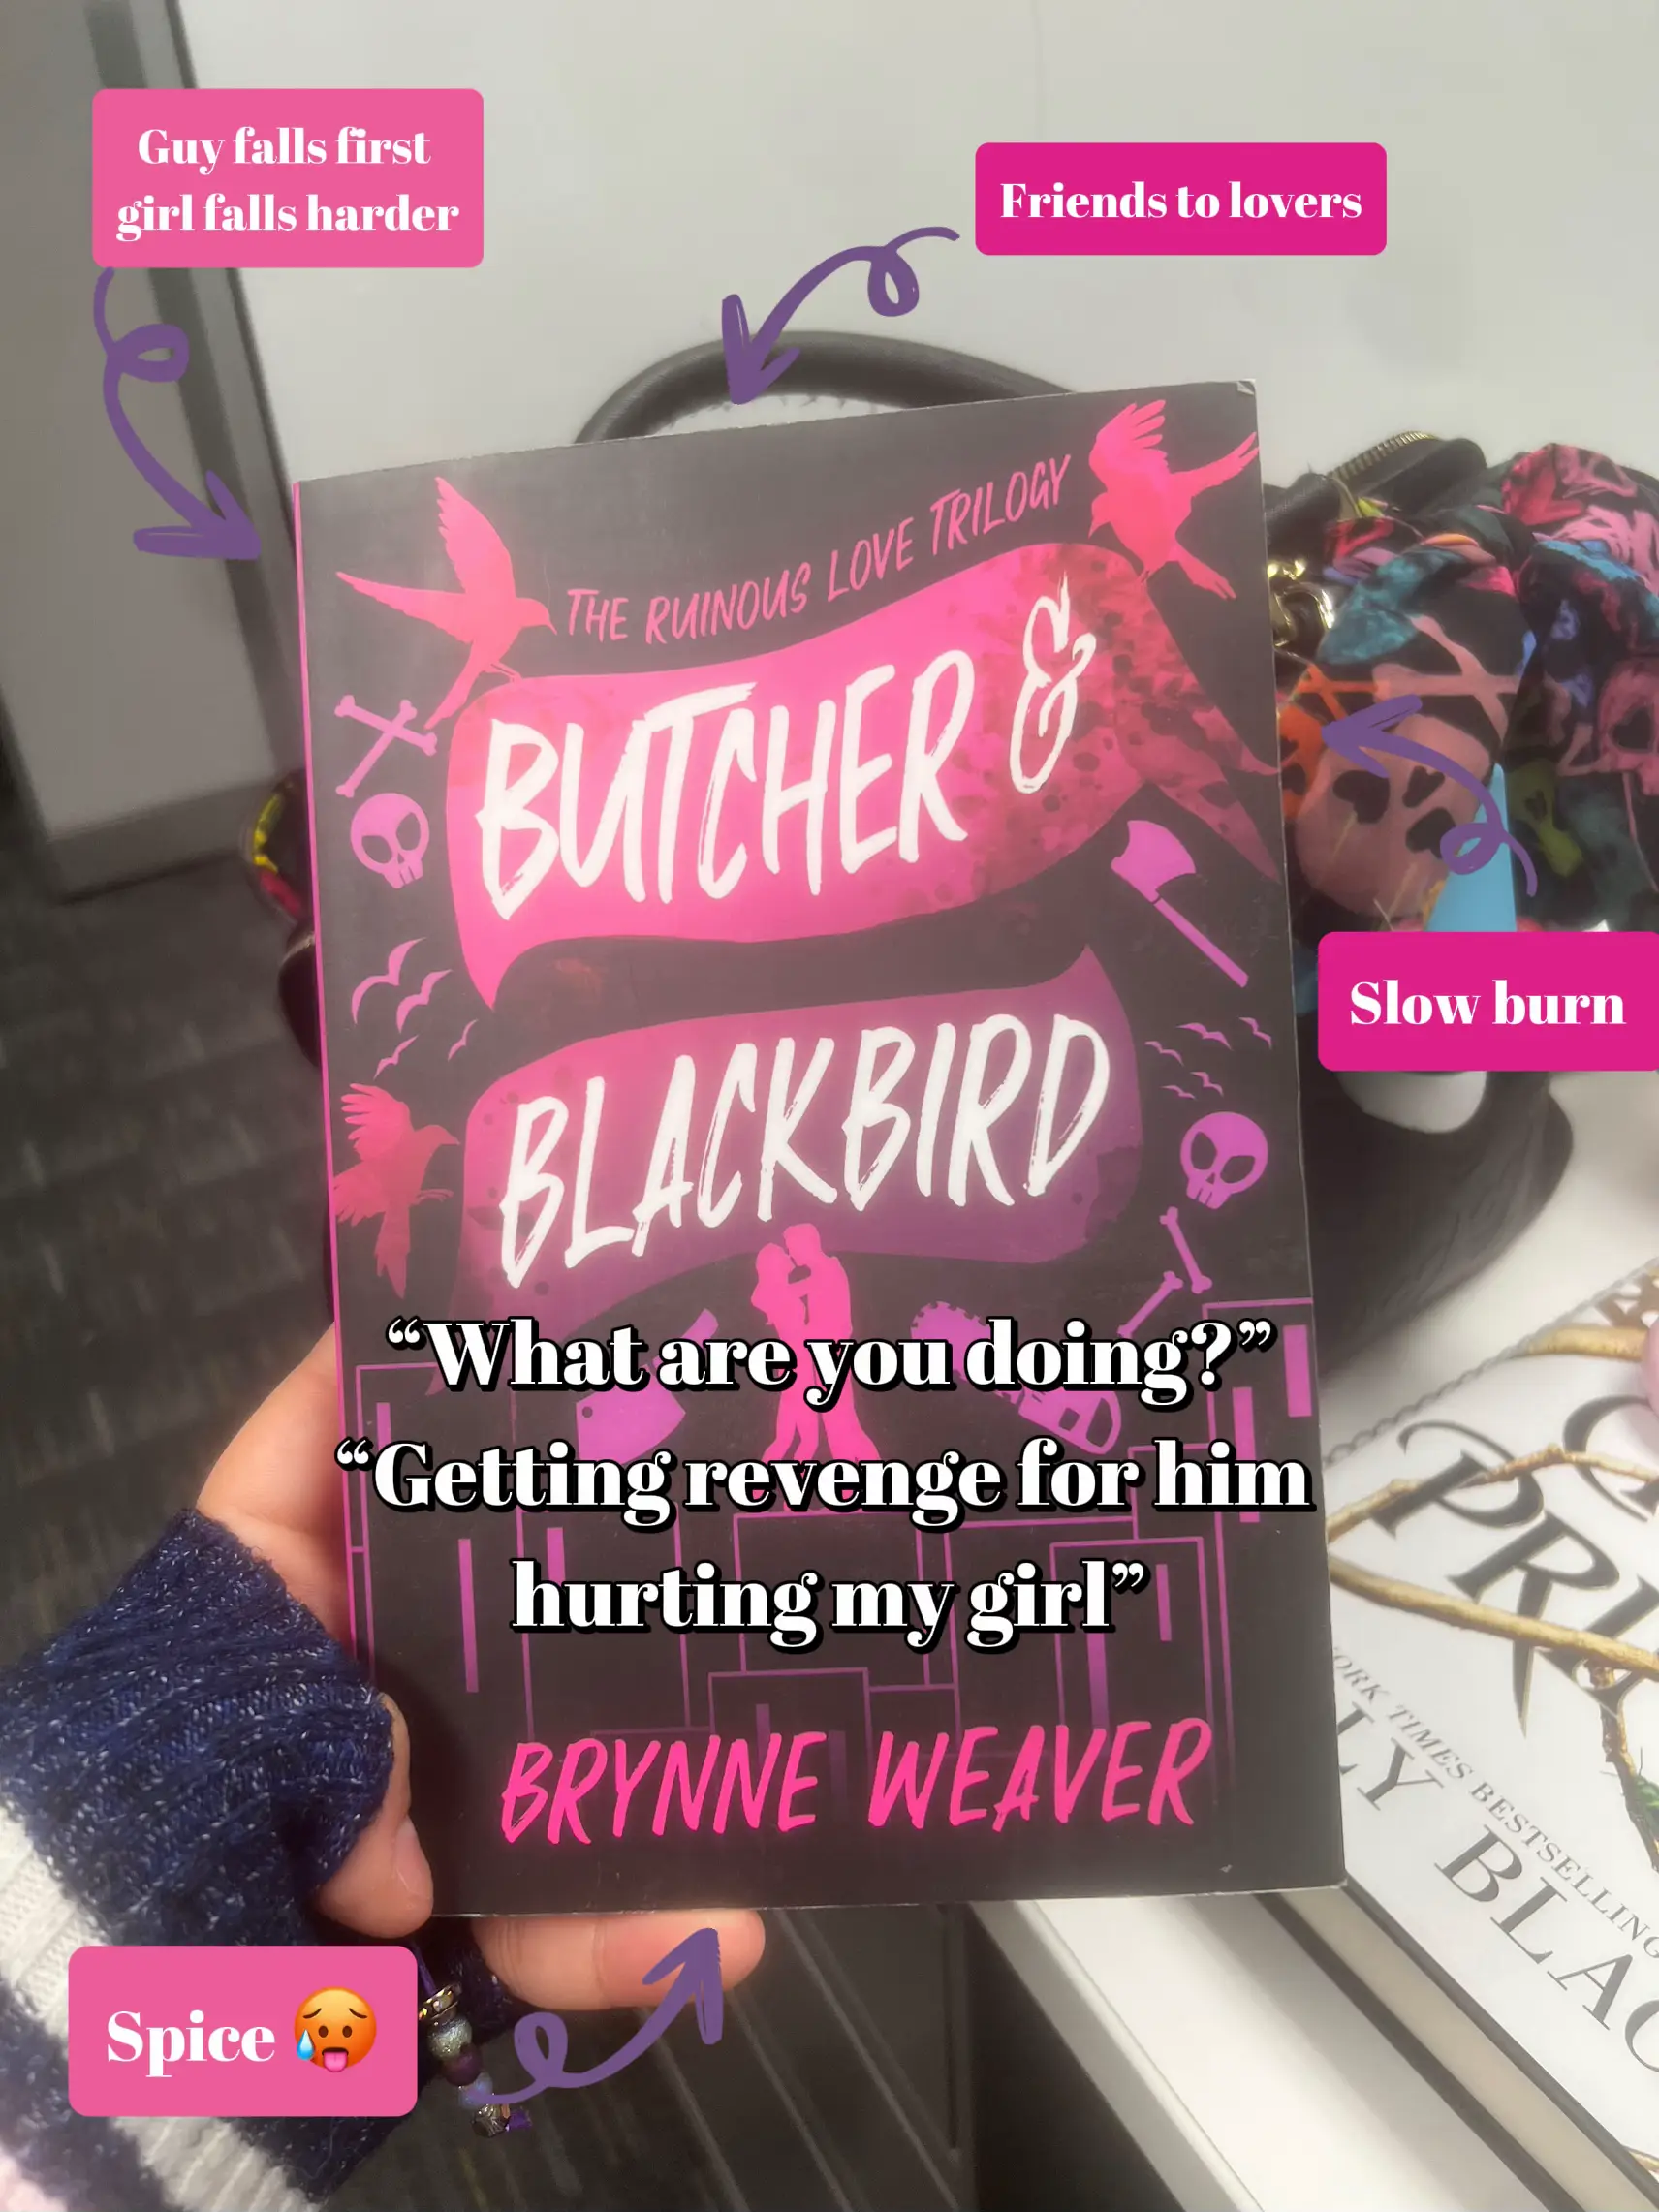 🩷💜Butcher and Blackbird🩷💜, Gallery posted by Julia Lathem🌼